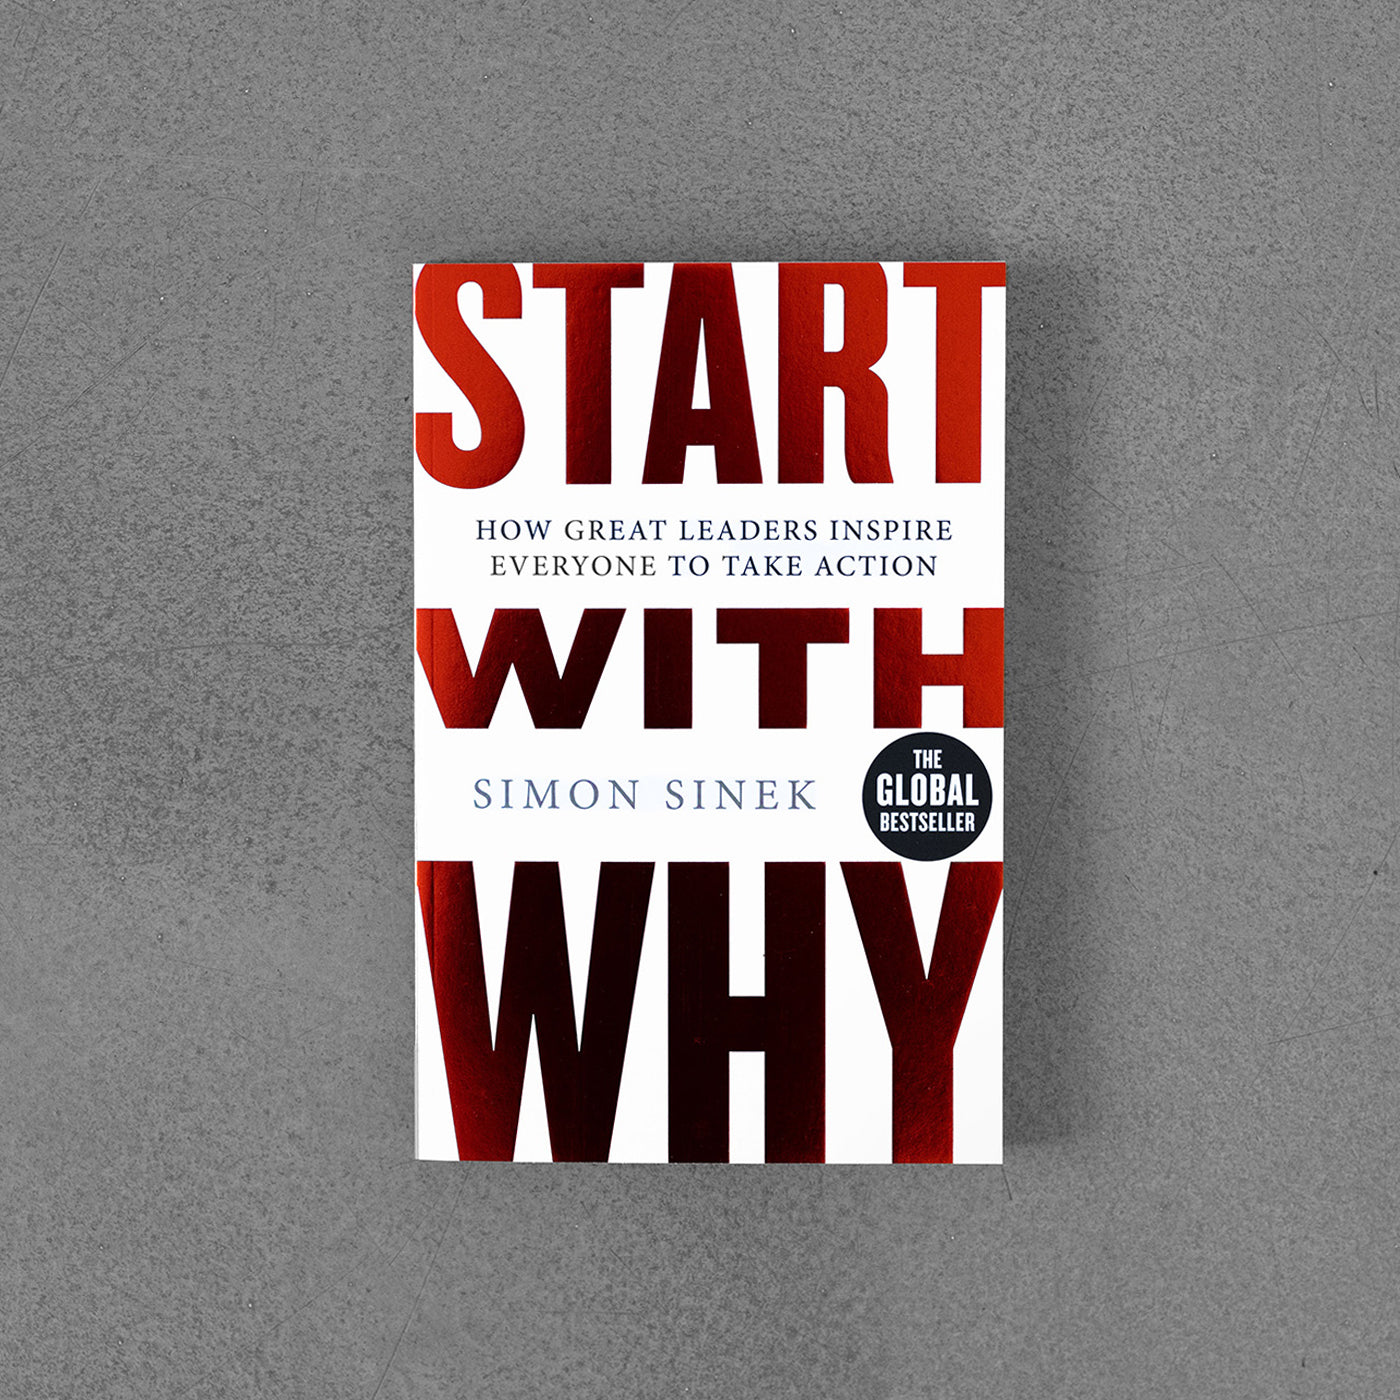 Start With Why, How Great Leaders Inspire - Simon Sinek